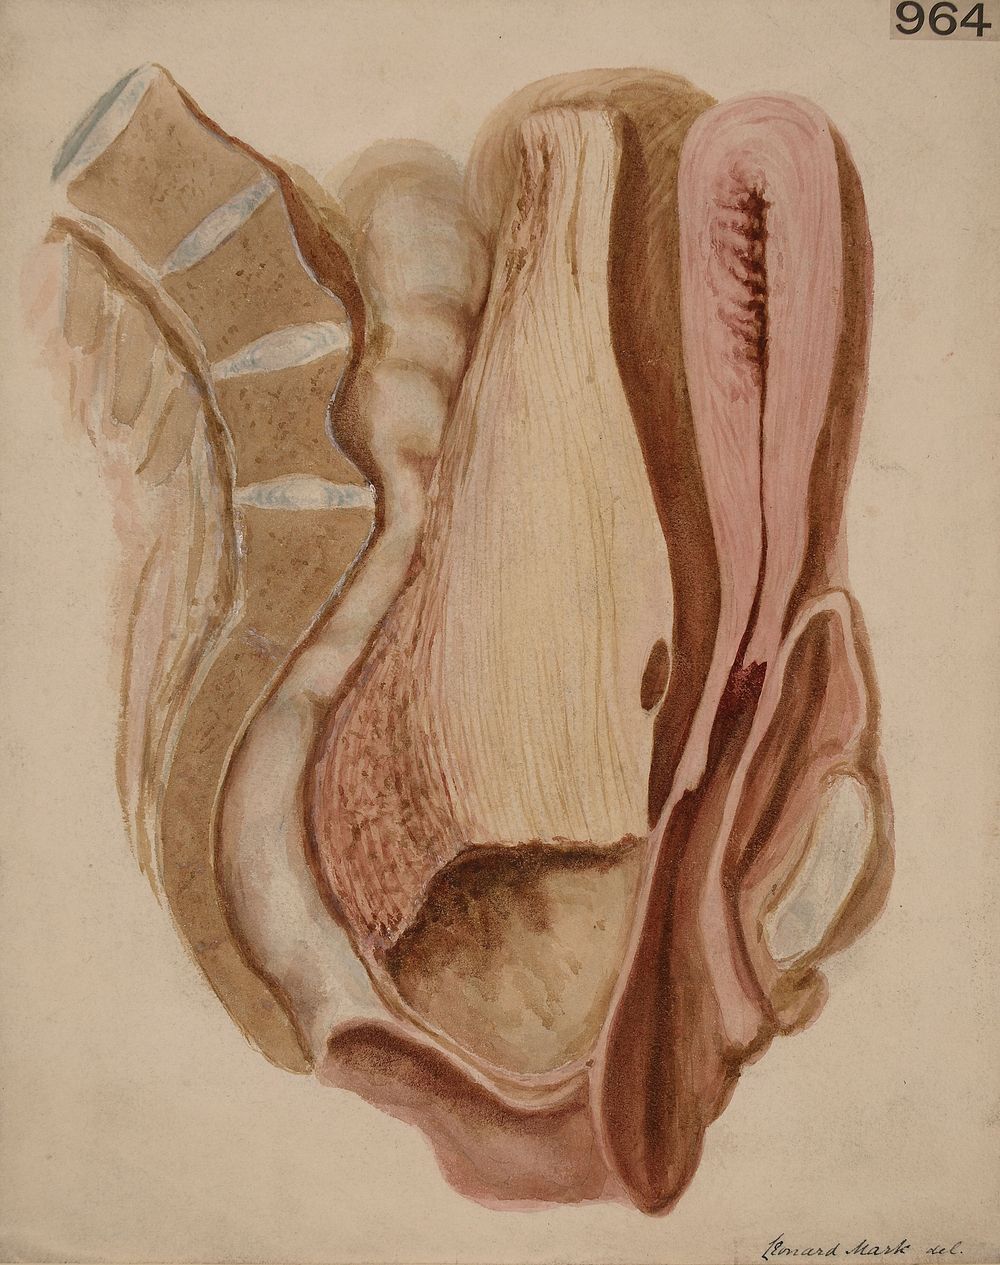 Sagittal section of the pelvis showing a large fibroma of the ovary